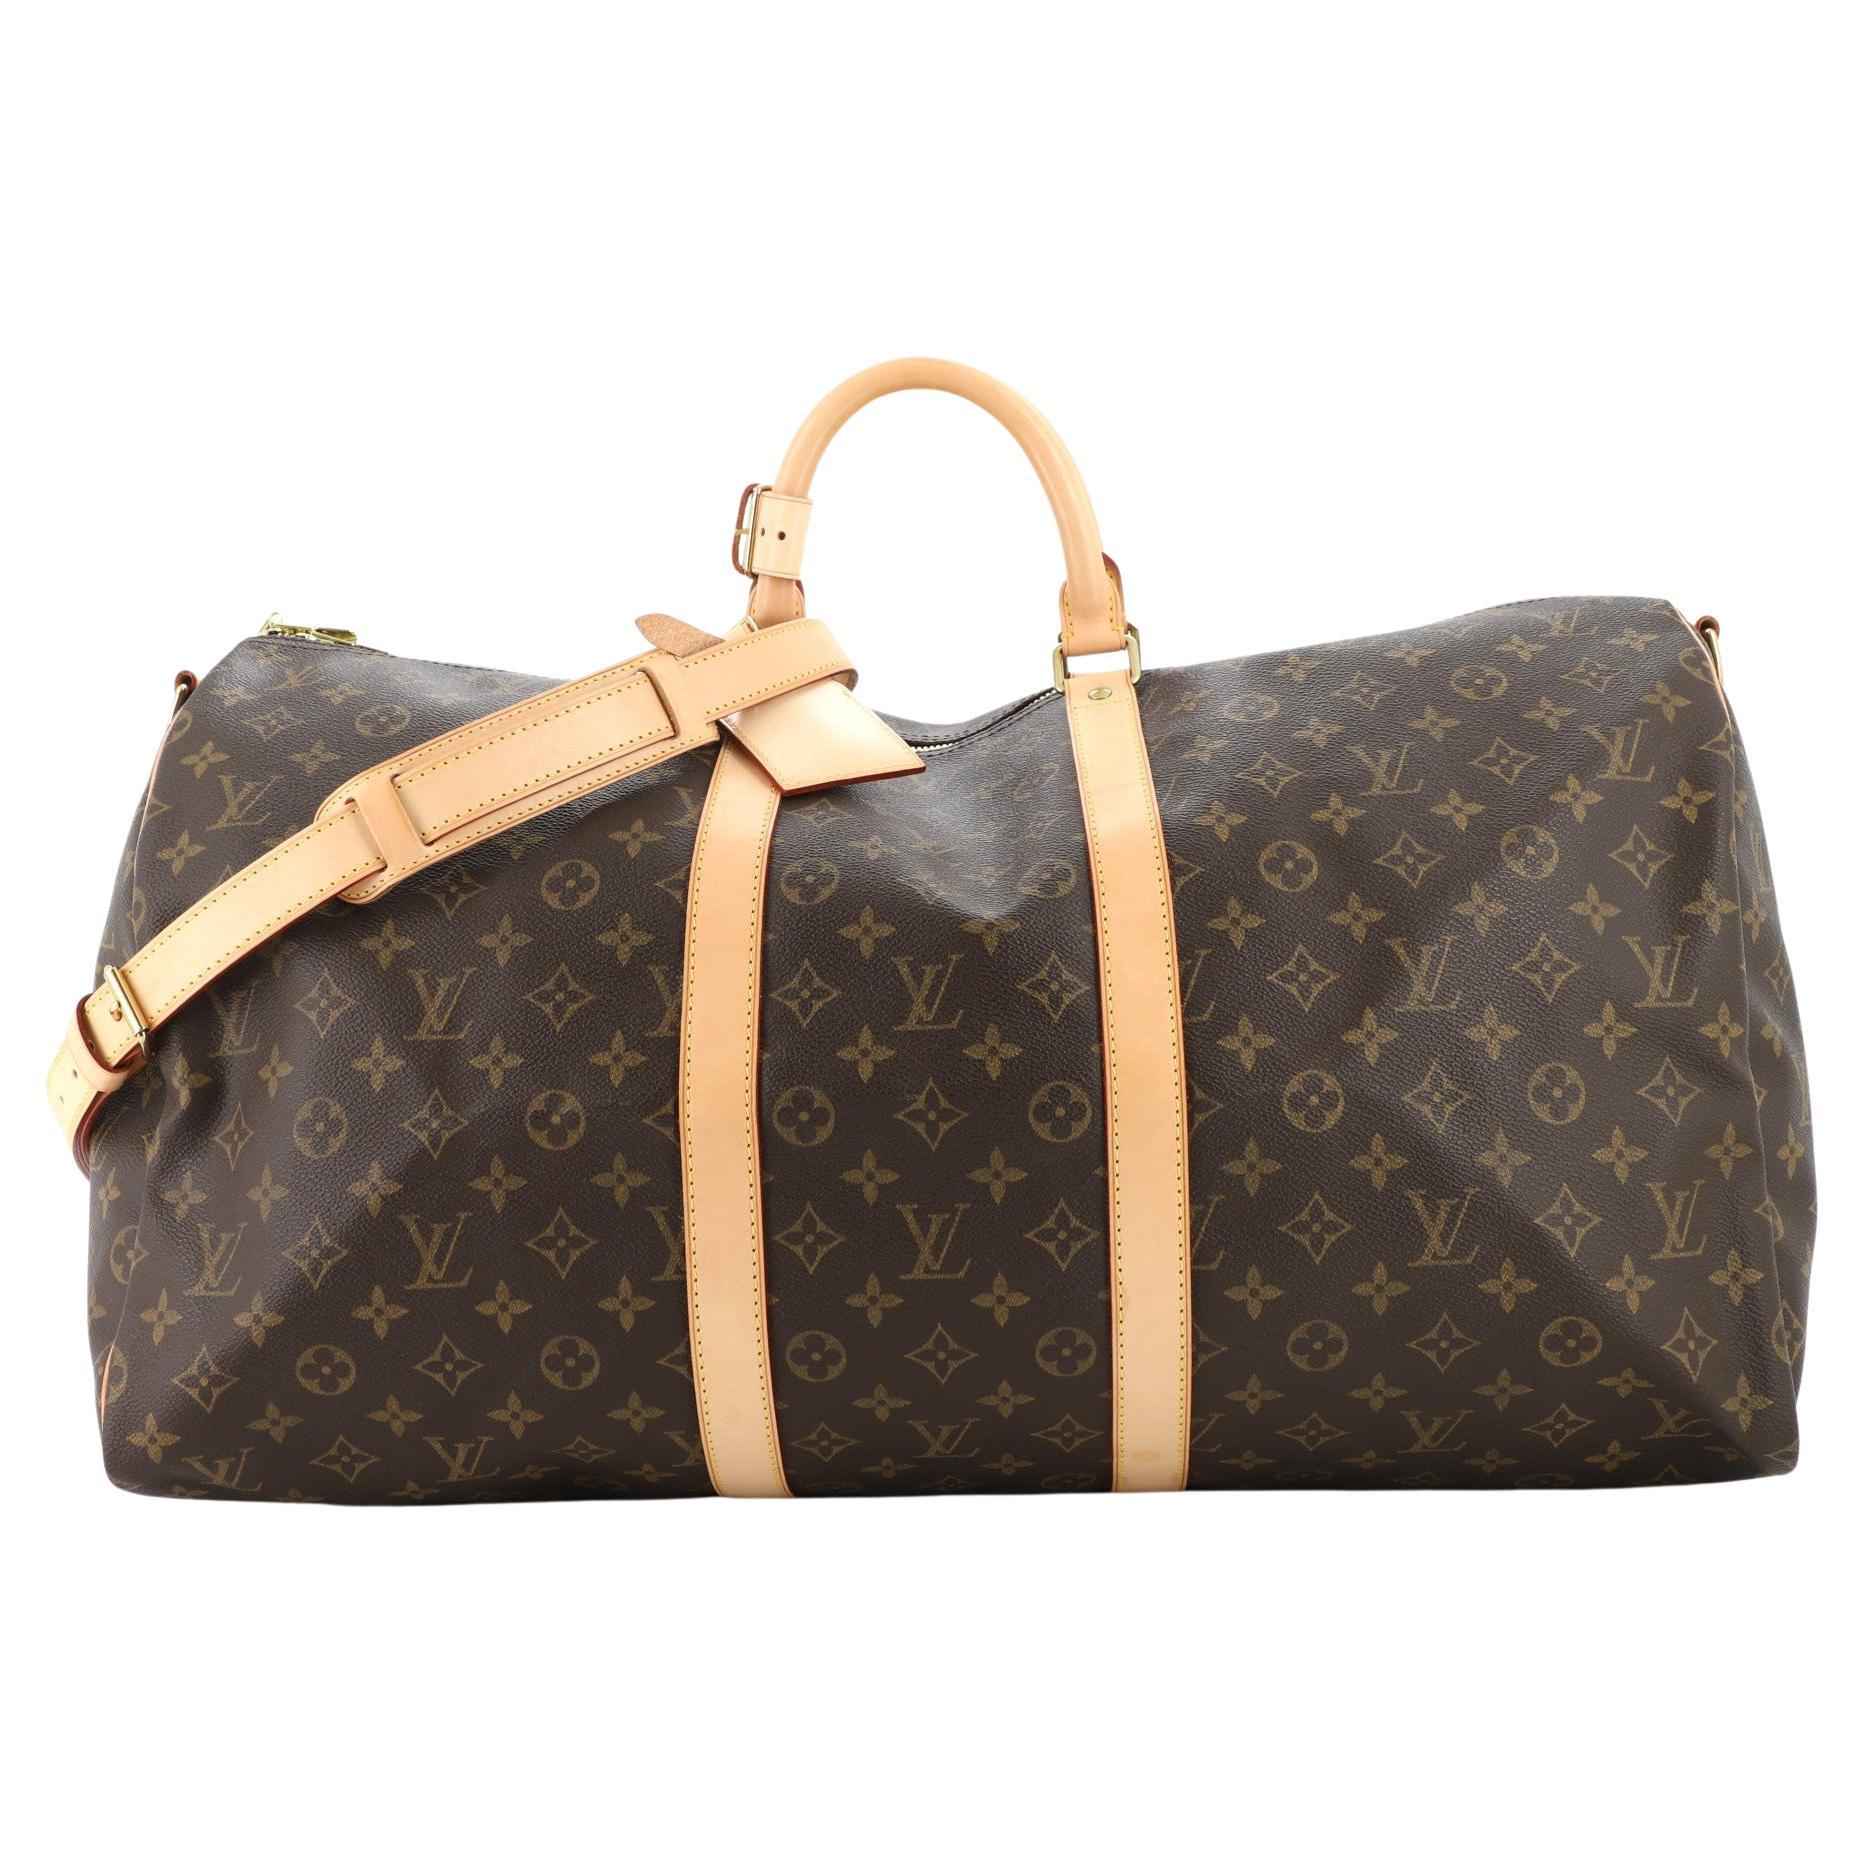 Louis Vuitton Keepall Bandouliere Bag Monogram Canvas with LV